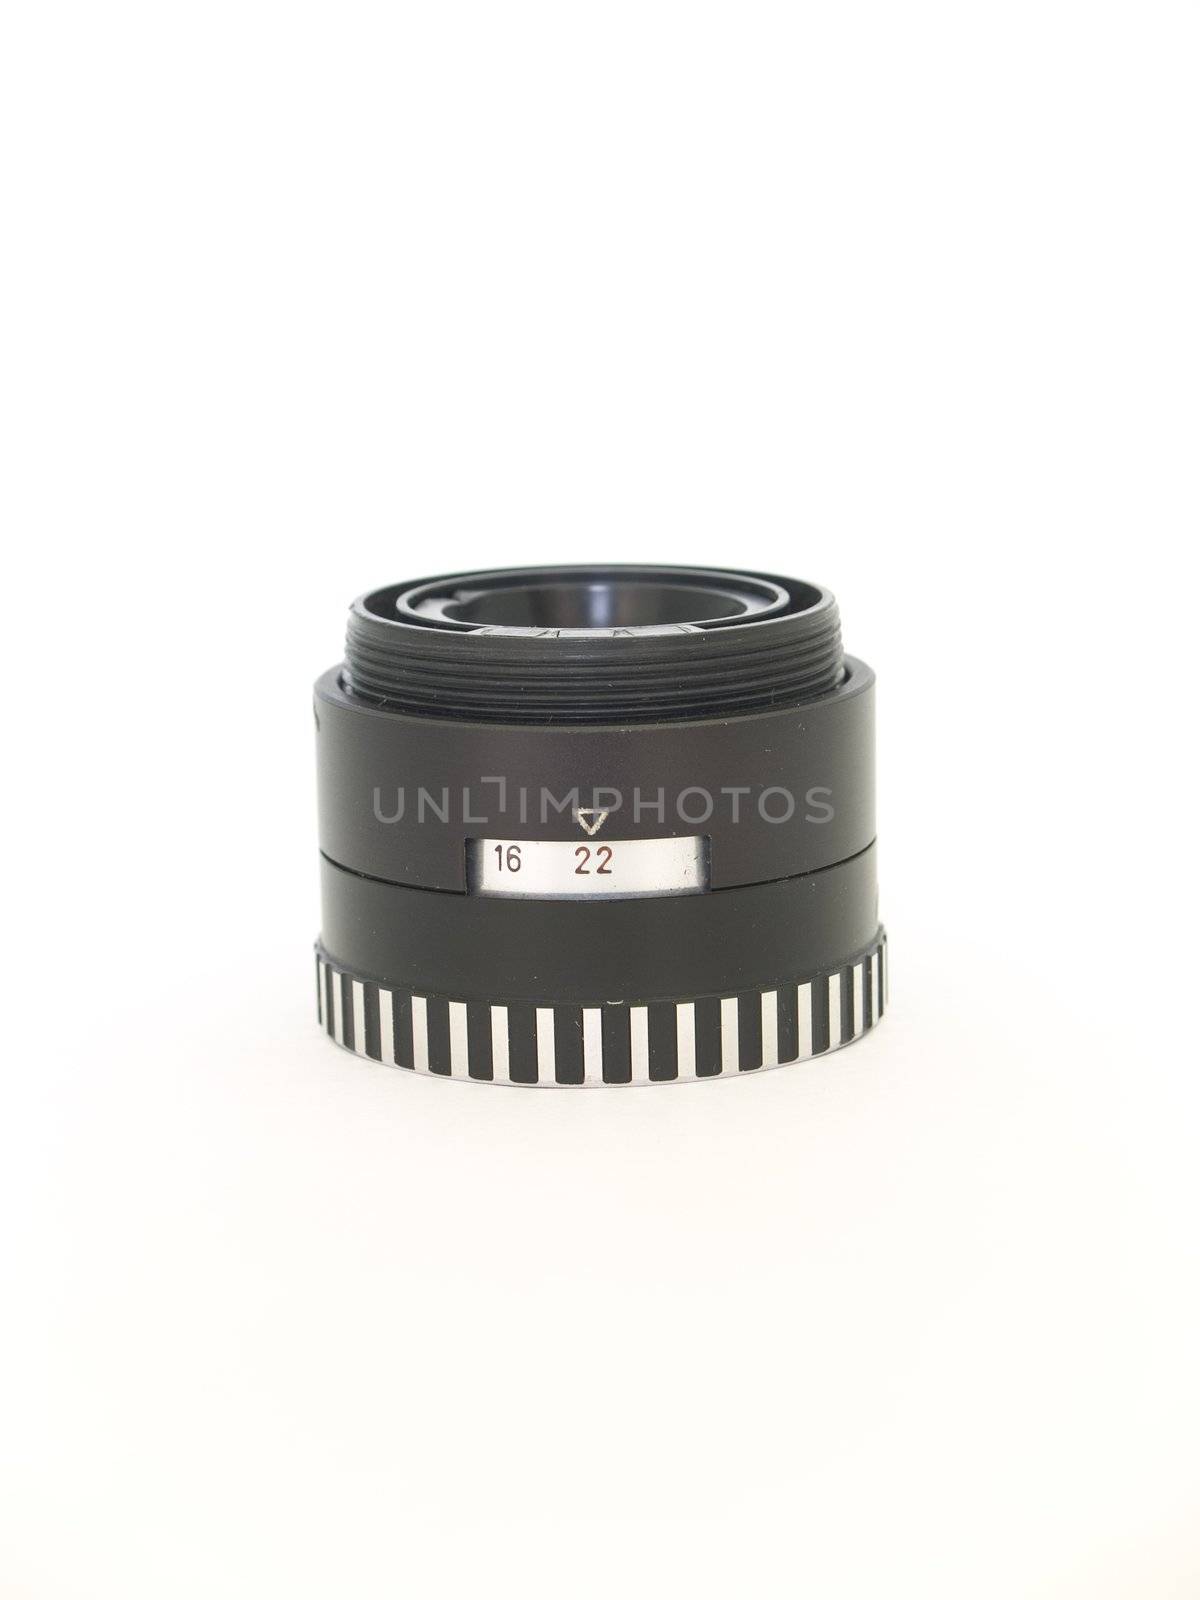 photographic lens by lauria